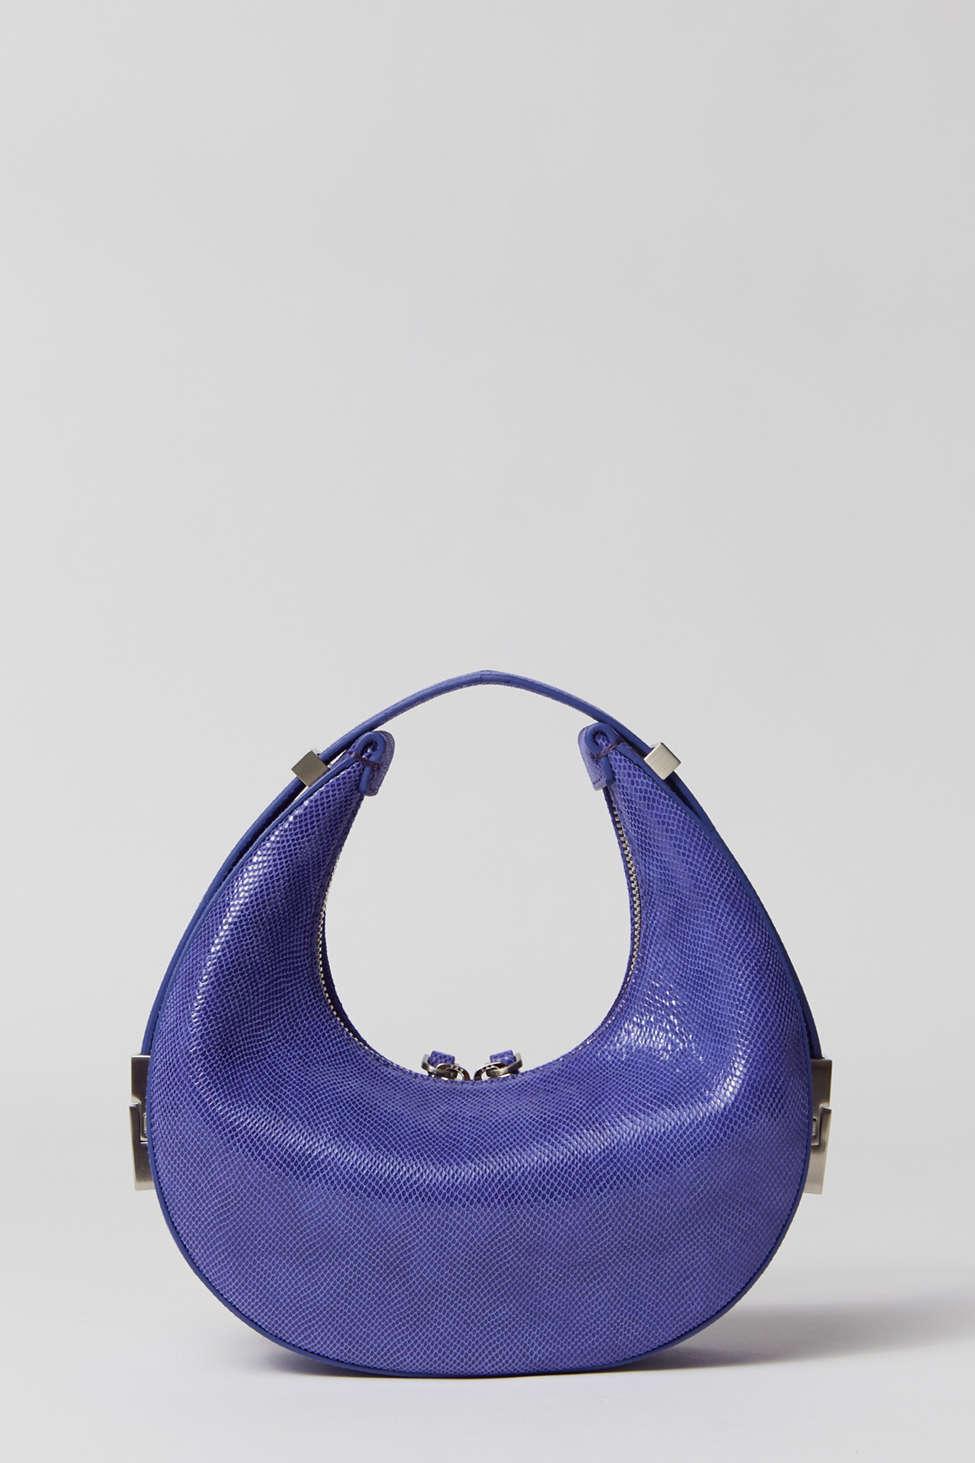 OSOI Toni Mini Shoulder Bag In Purple,at Urban Outfitters | Lyst